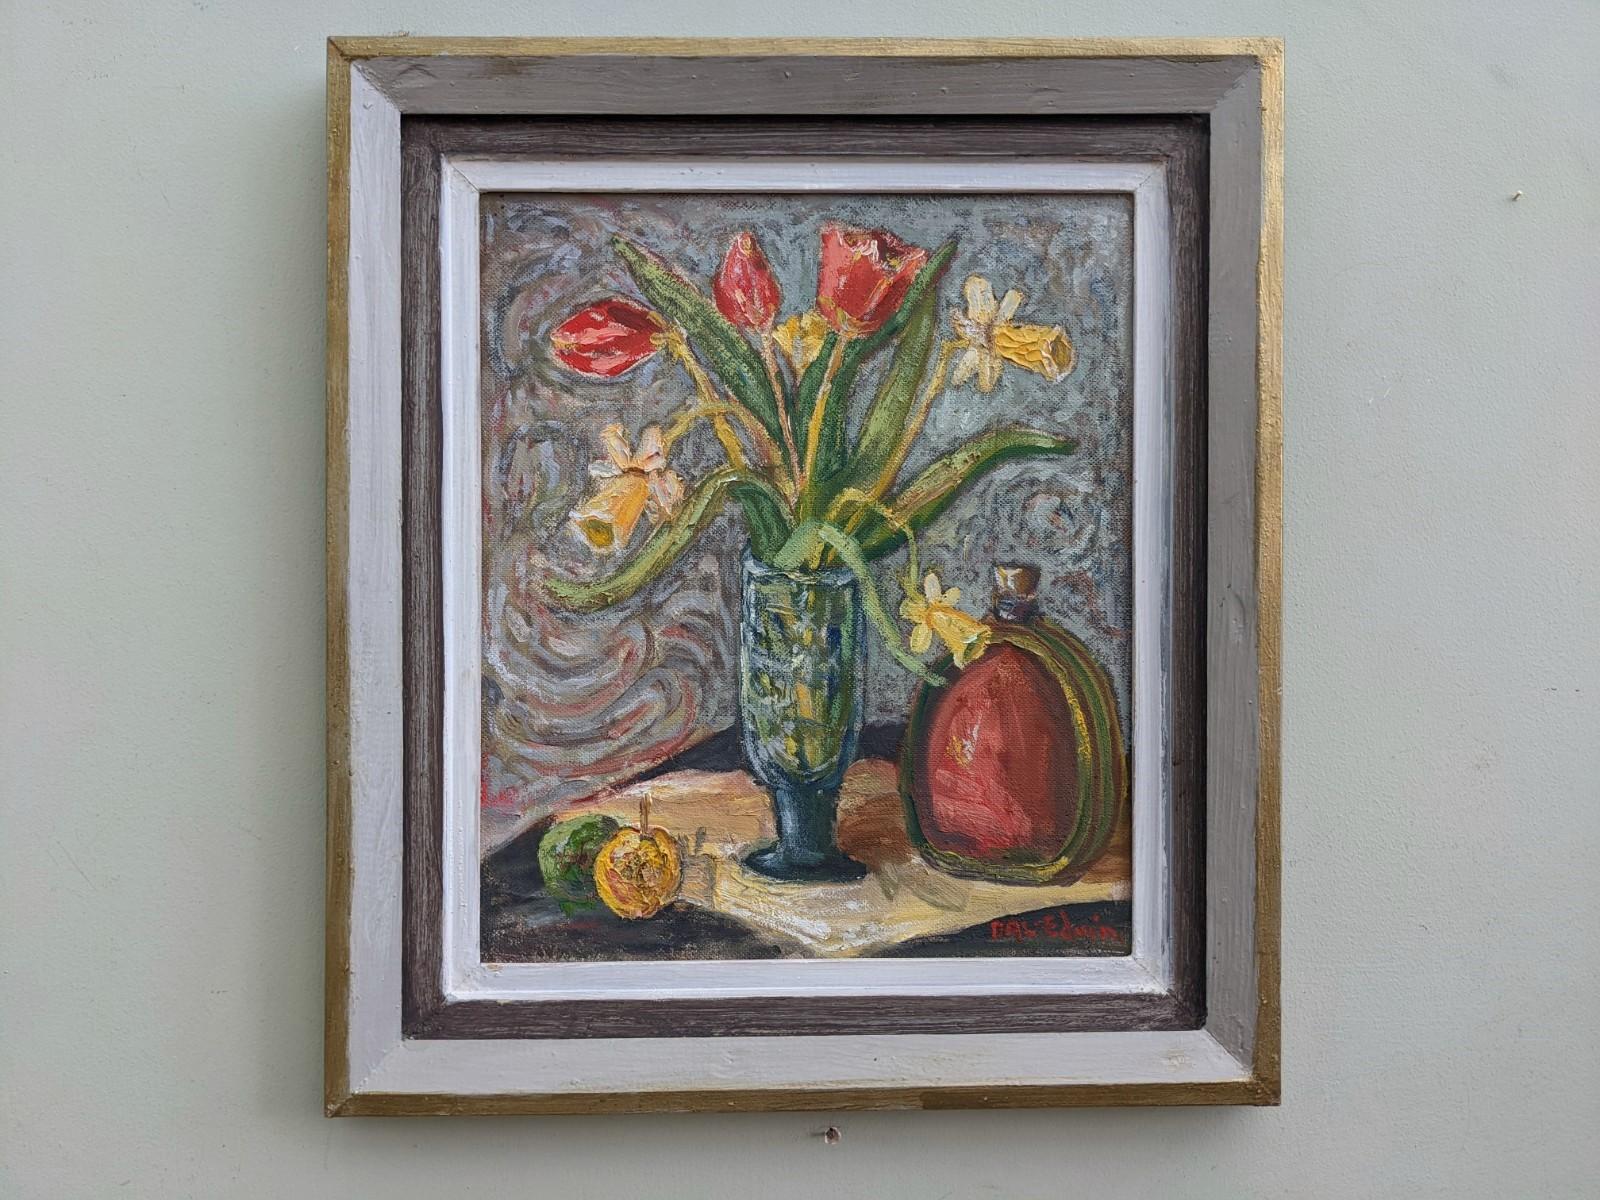 Vintage Mid-Century Swedish Framed Oil Painting - Still Life with Tulips - Gray Still-Life Painting by Unknown